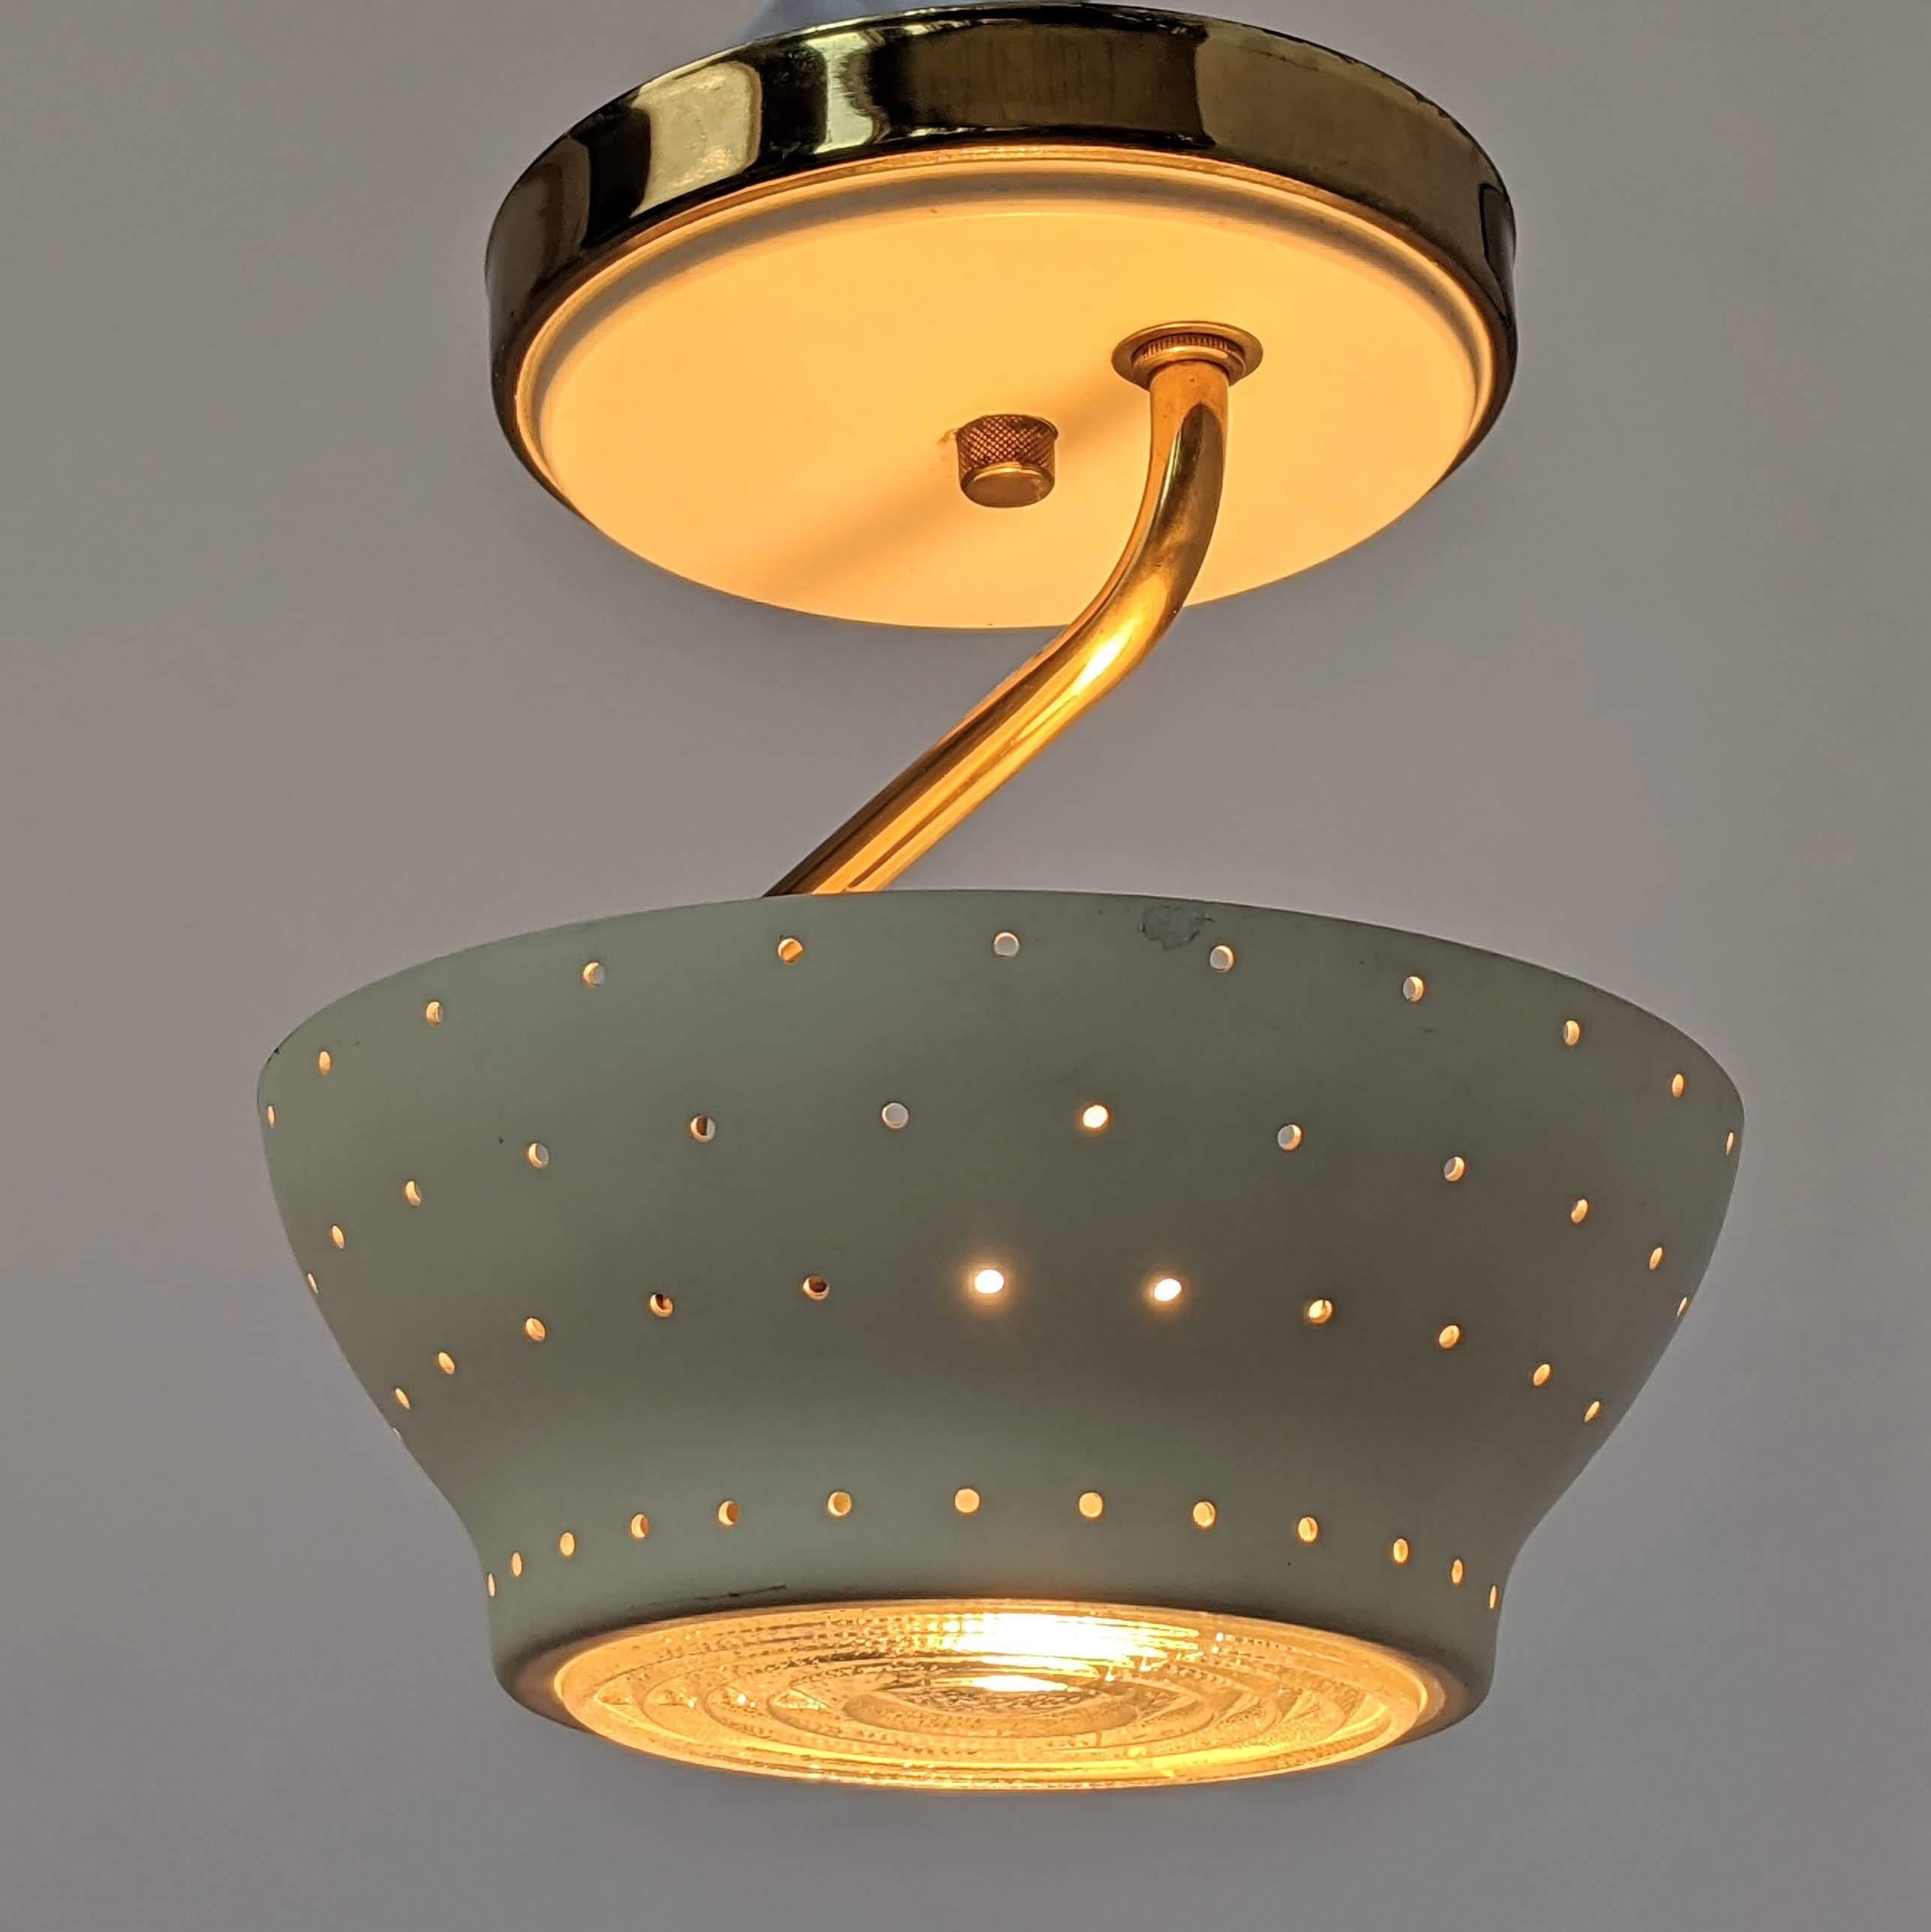 Enameled aluminium pierced shade flush mount with brass arm and thick glass lens diffuser.  

Solid well made construction.

E26 size socket rated at 60 watt.